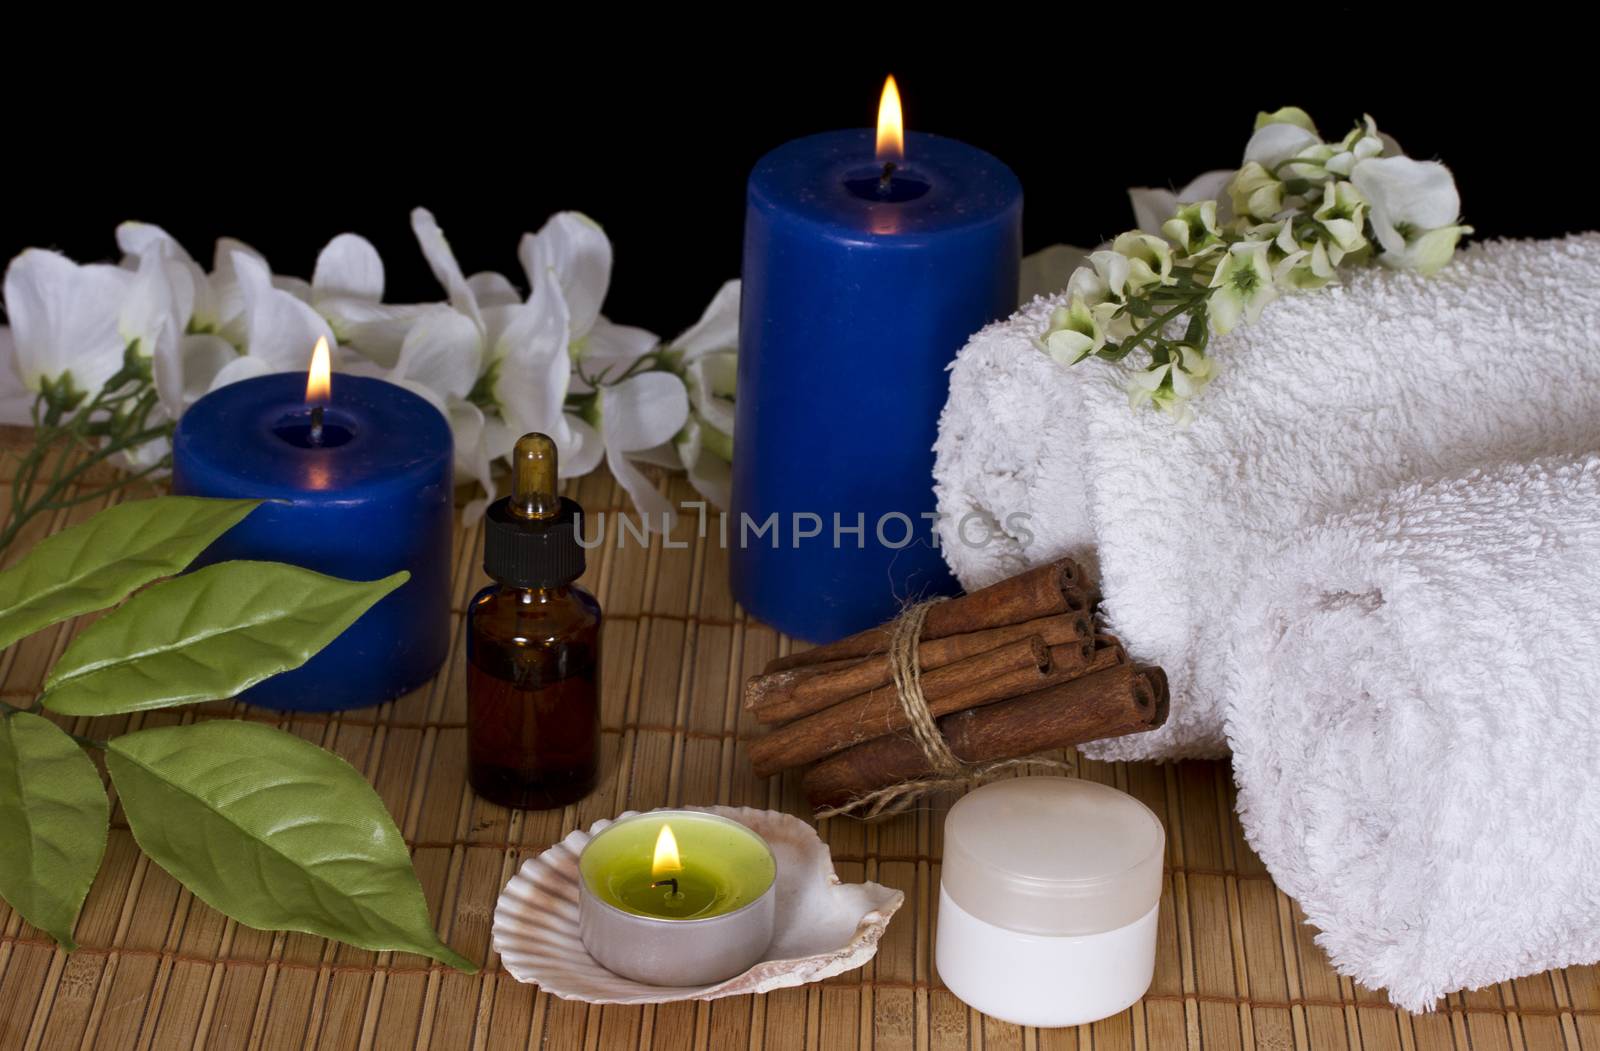 Accessories for spa treatments in the candlelight by Irina1977